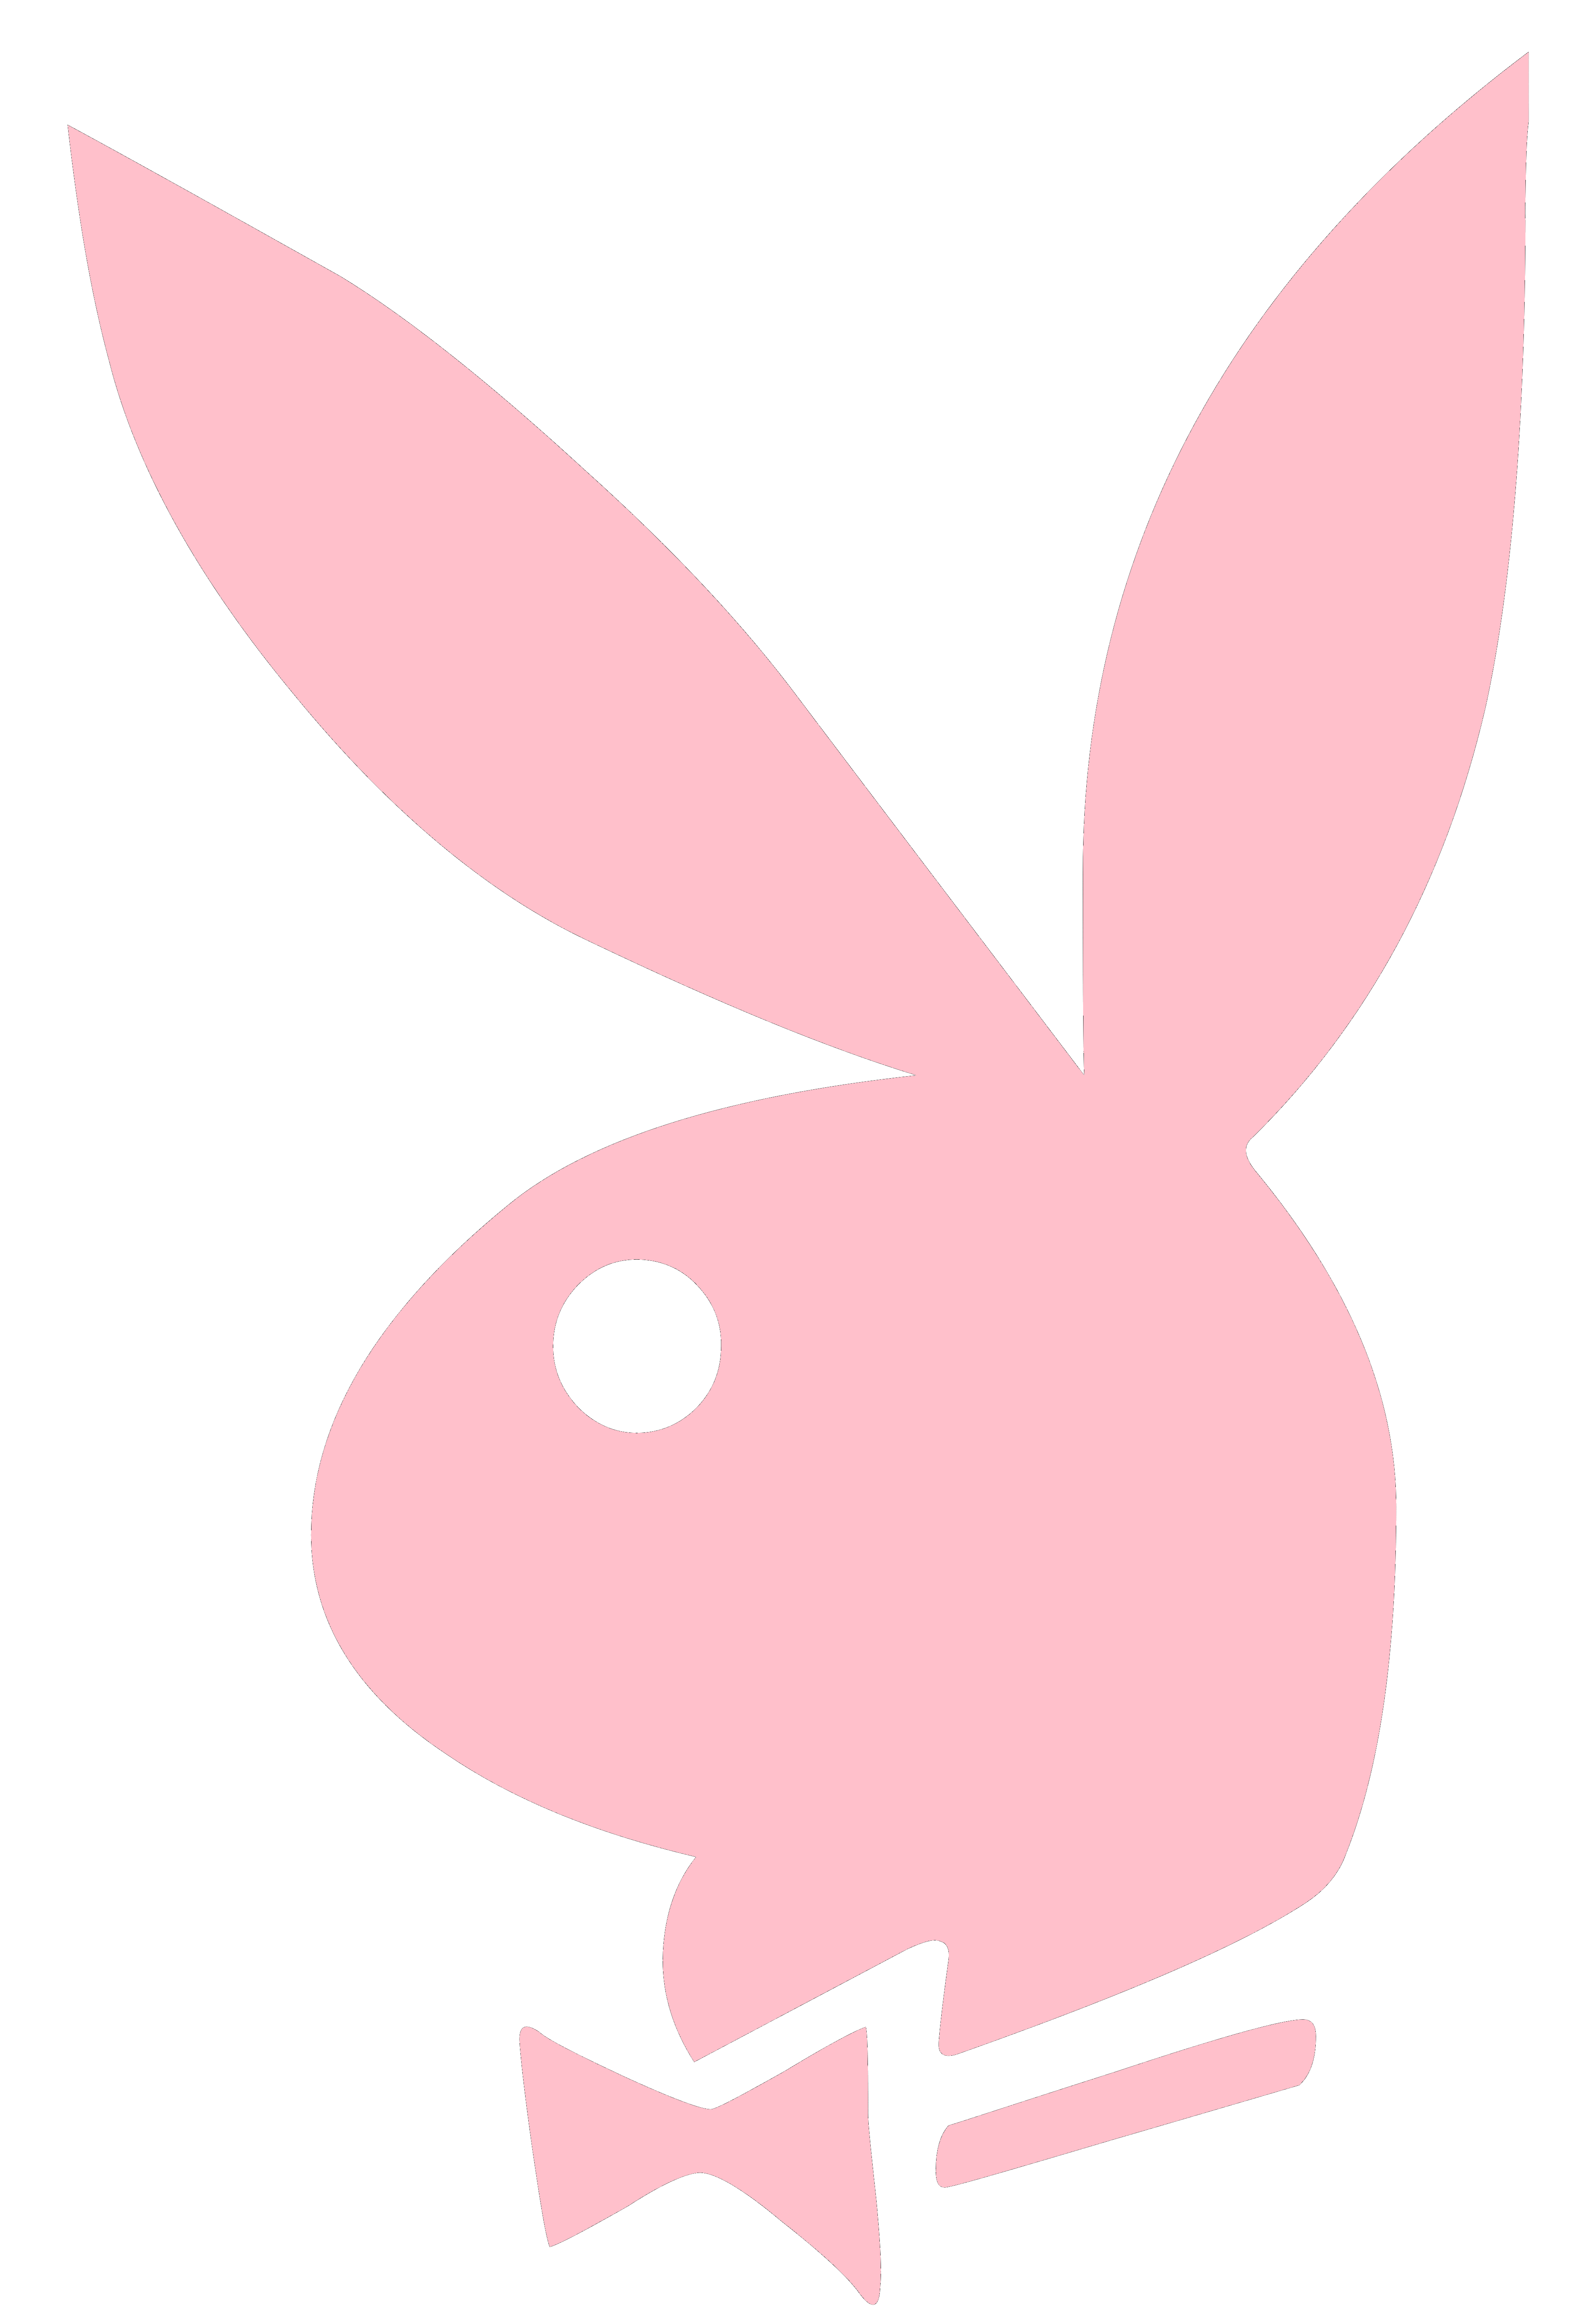 Playboy Bunny Silhouette #1542081 (License: Personal Use) .